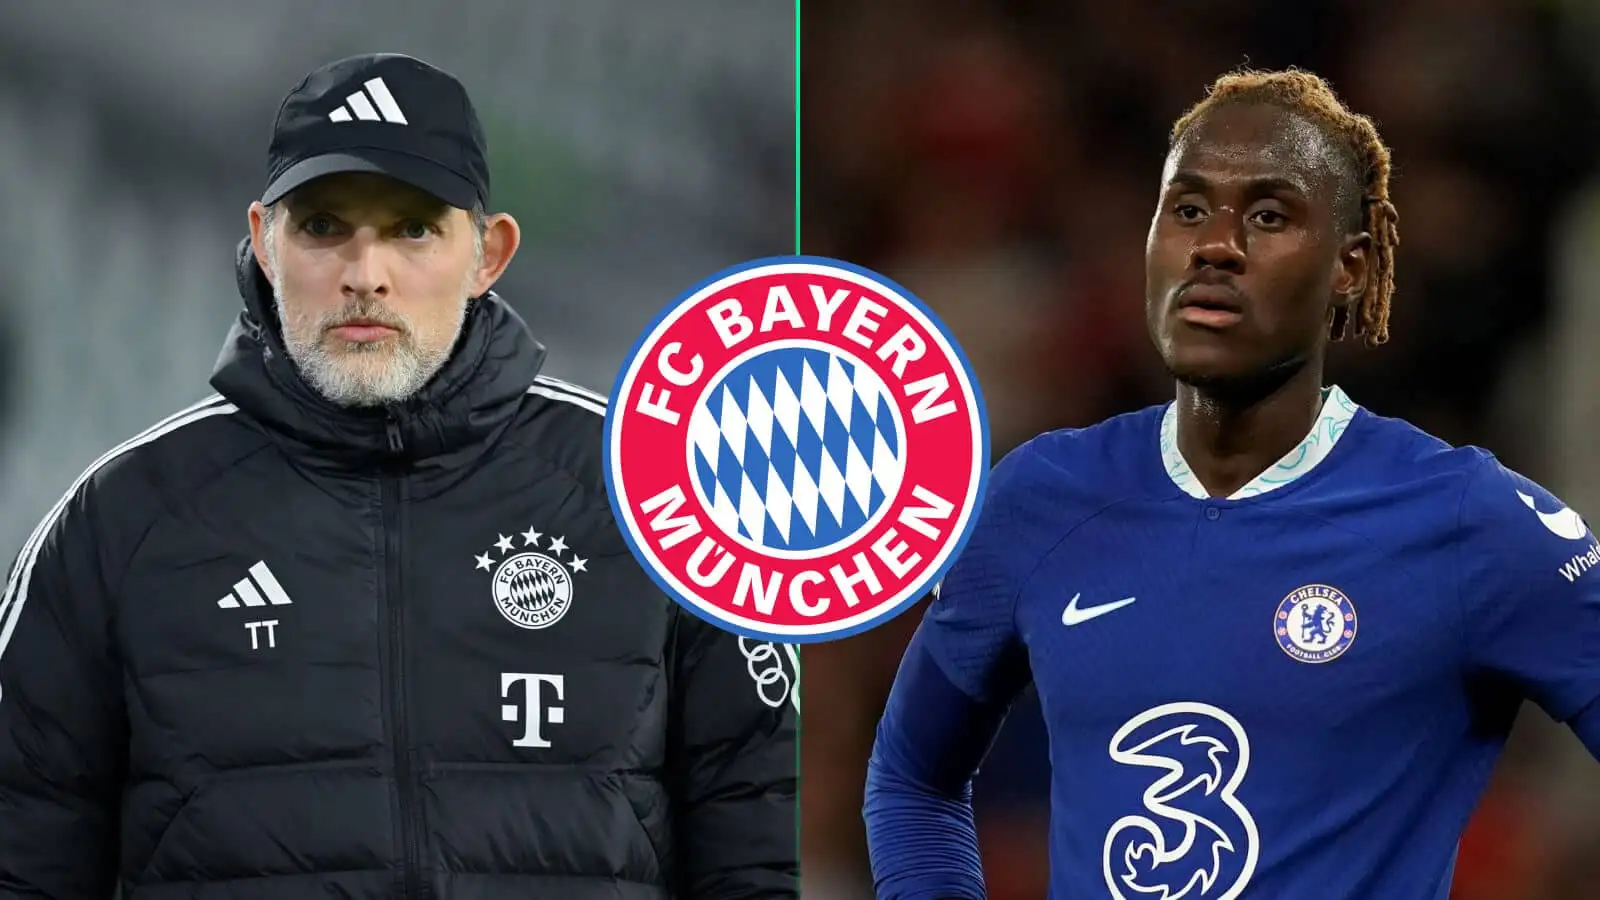 Thomas Tuchel and Trevoh Chalobah either side of the Bayern Munich badge